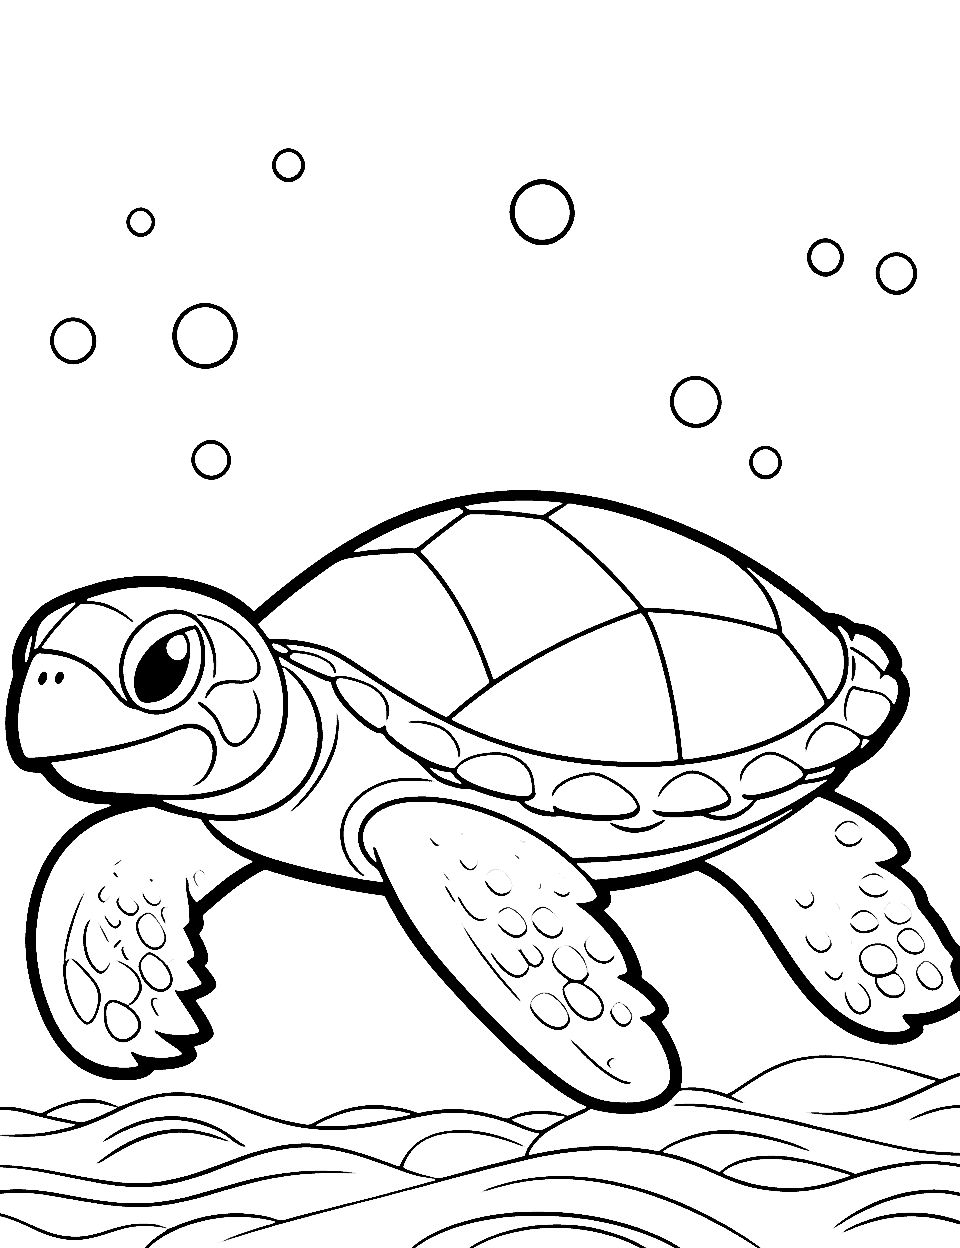 Easy-Breezy Turtle Coloring Page - A minimalistic turtle design for easy and quick coloring.